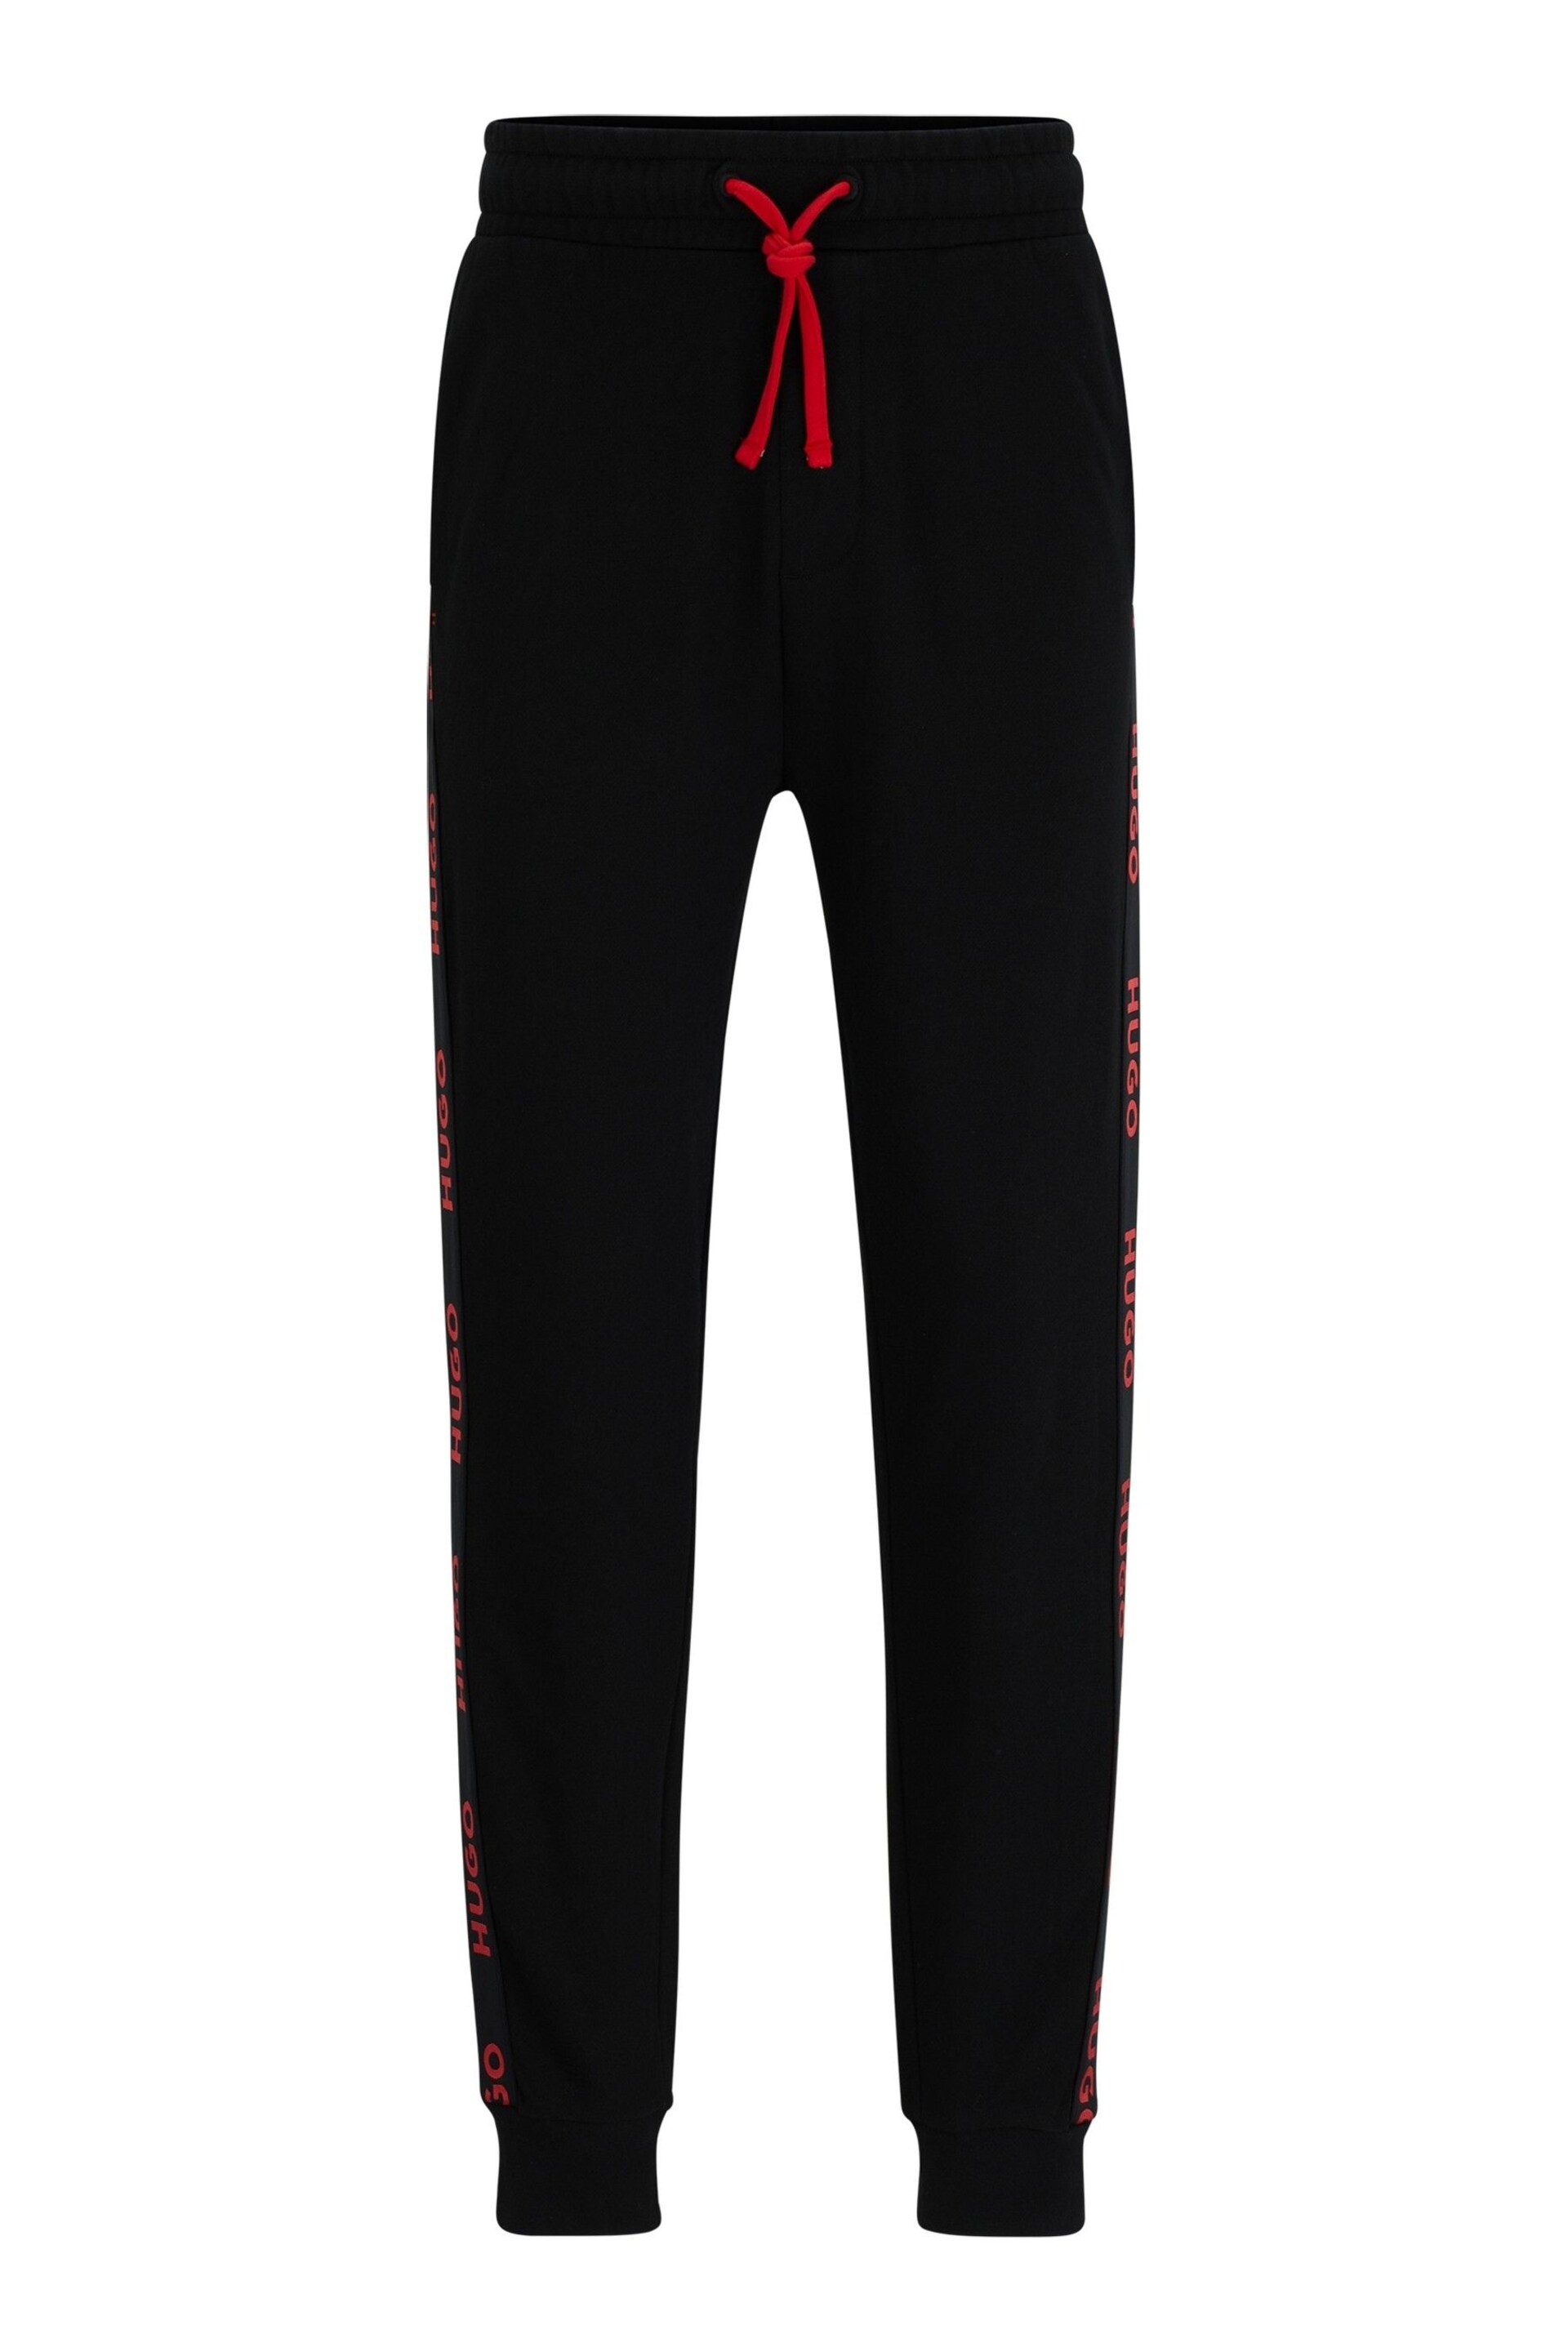 HUGO Embroidered Tape Logo Tracksuit Joggers - Image 6 of 6